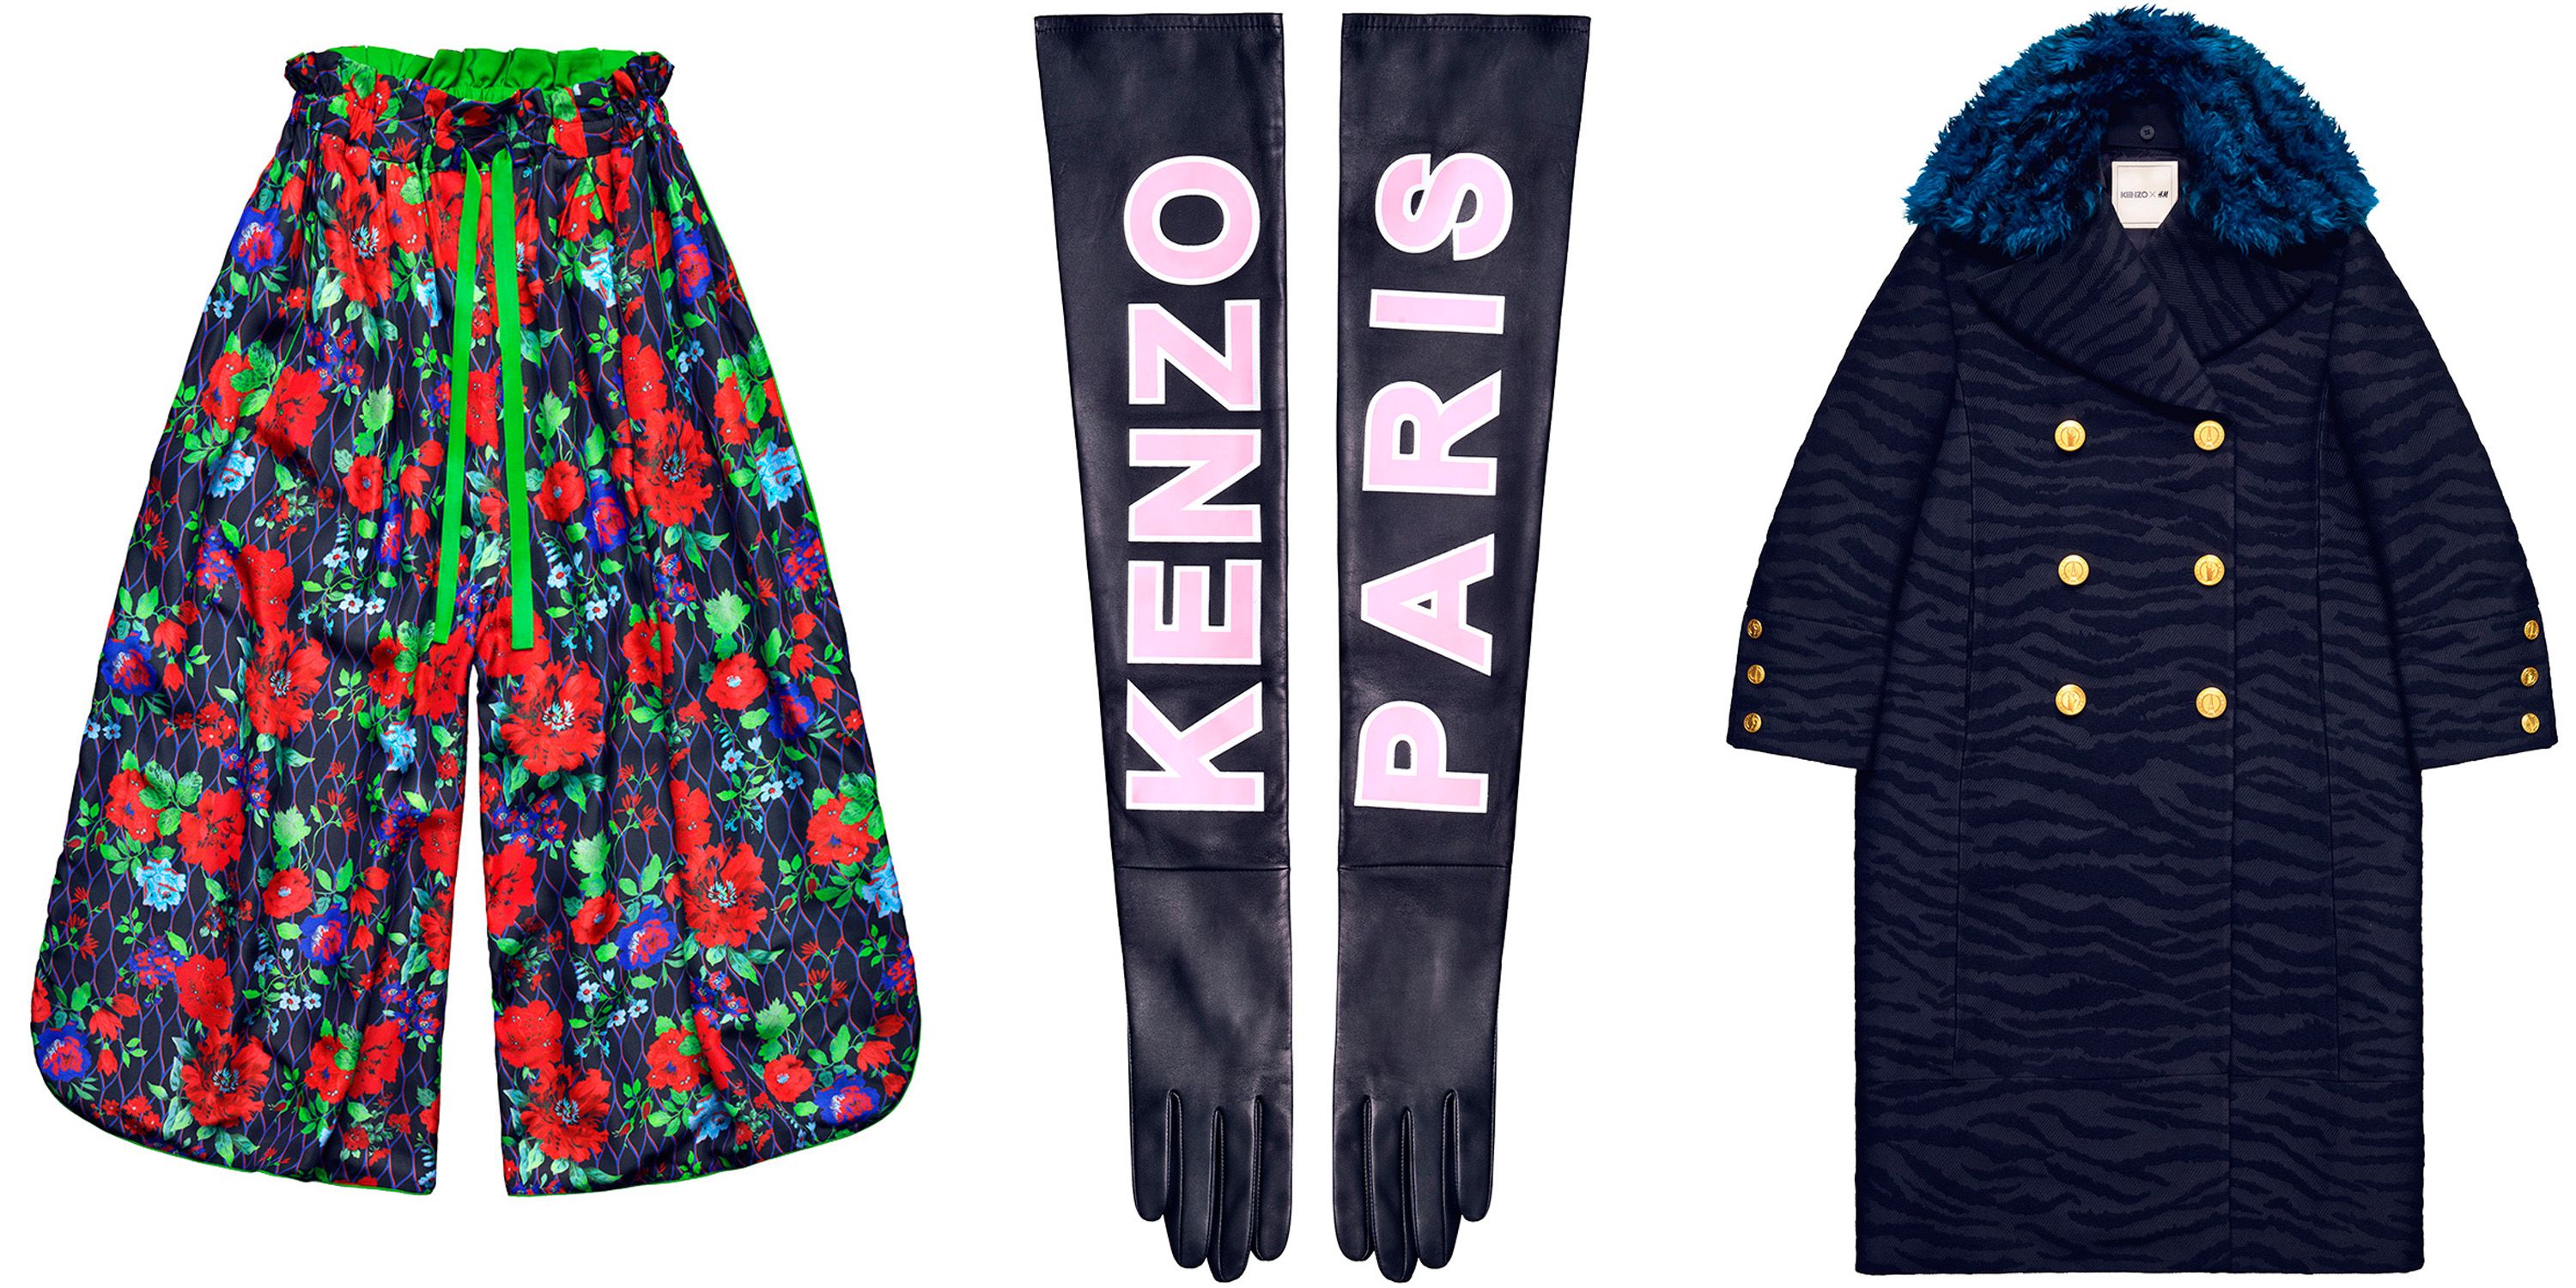 50 Pieces from the Kenzo x H\u0026M Collection